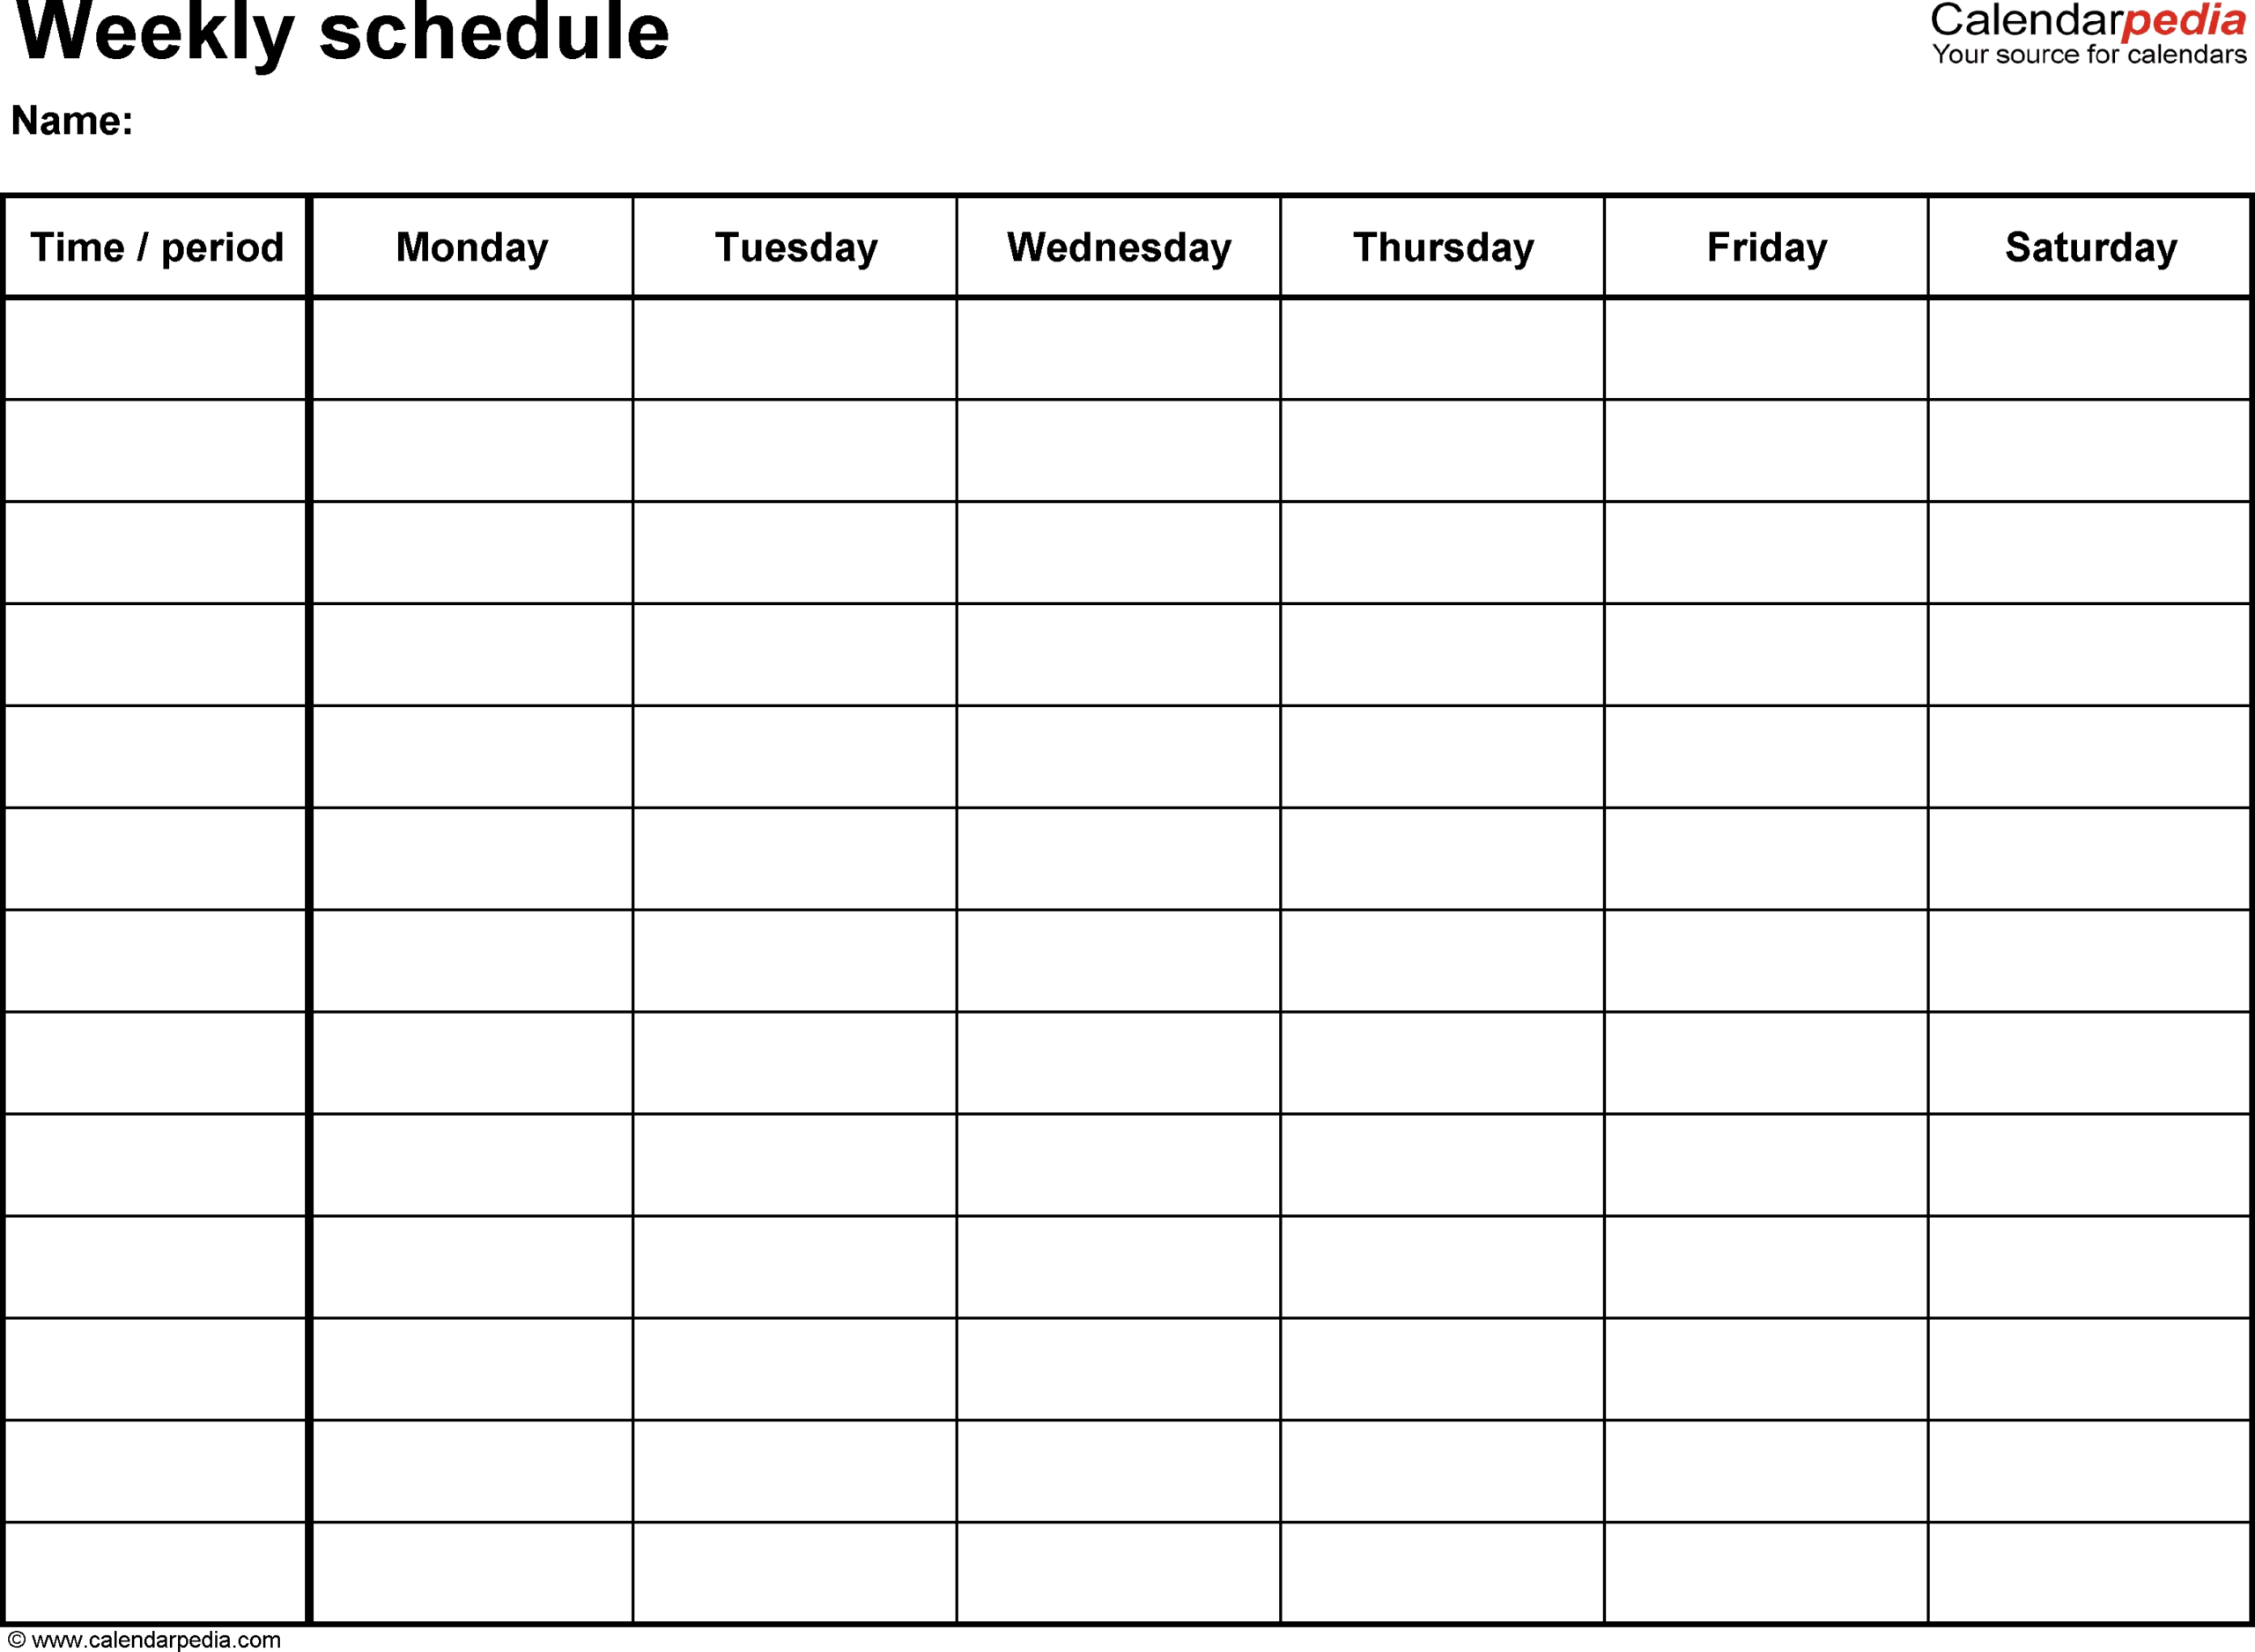 Printable Weekly Schedule Monday Through Friday - Calendar  Printable Monday Through Friday Schedule